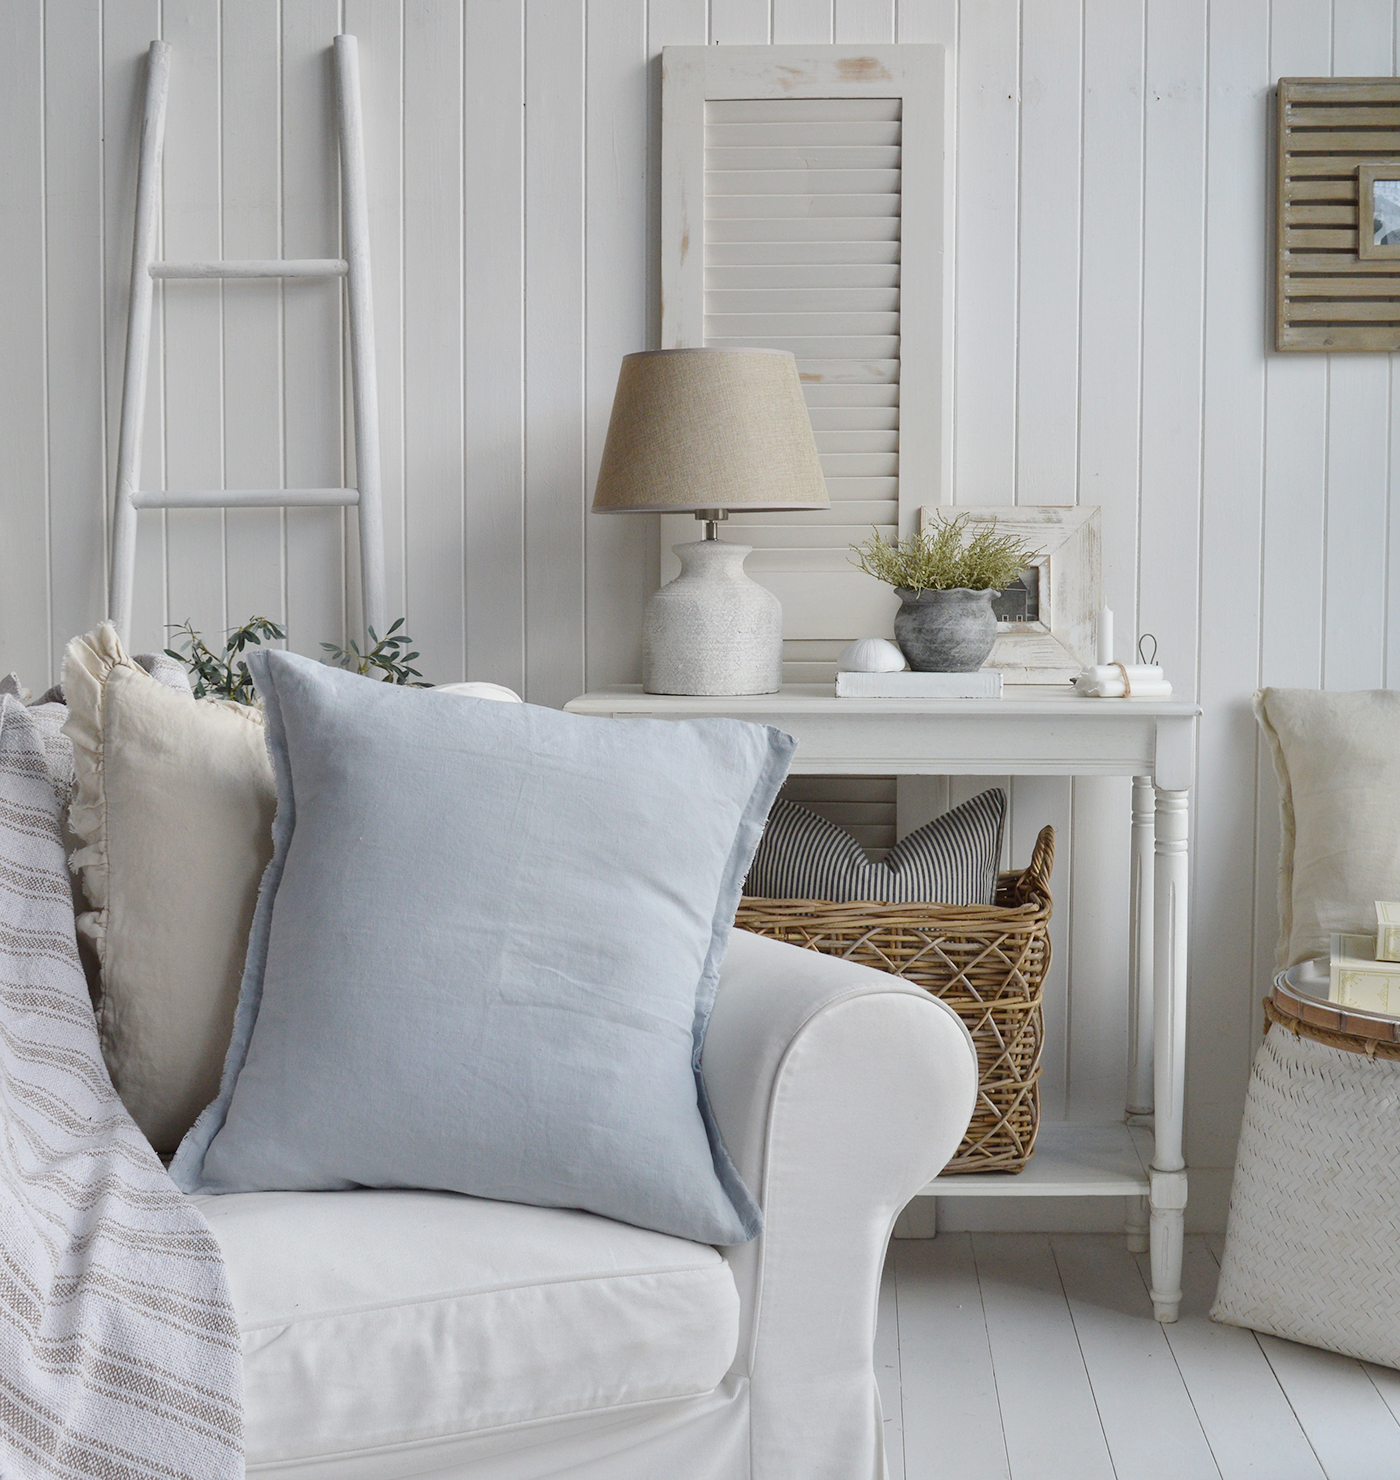  A coastal inspired living room, New England style with white furniture, Hamilton linen cushions, and accessories